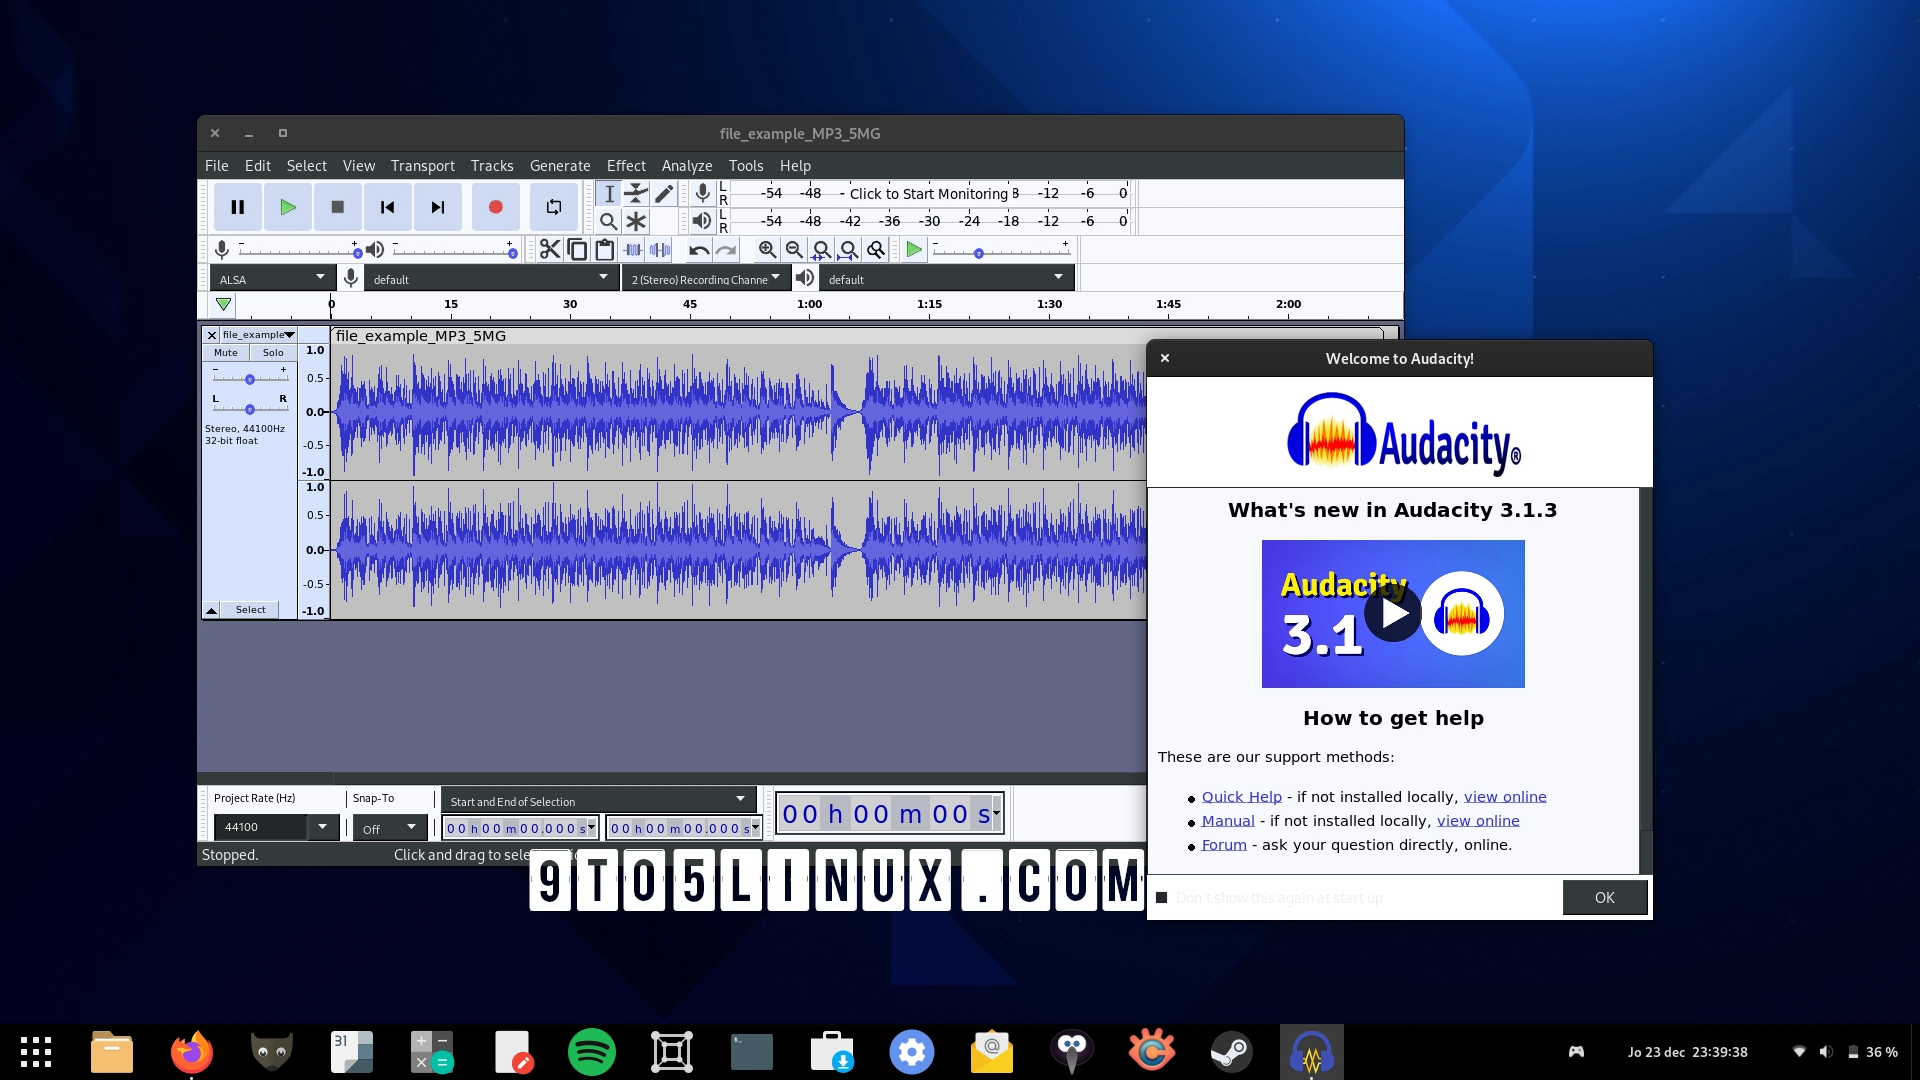 Audacity 3.1.3 Open-Source Audio Editor Makes Project Loading Up to 50x Faster